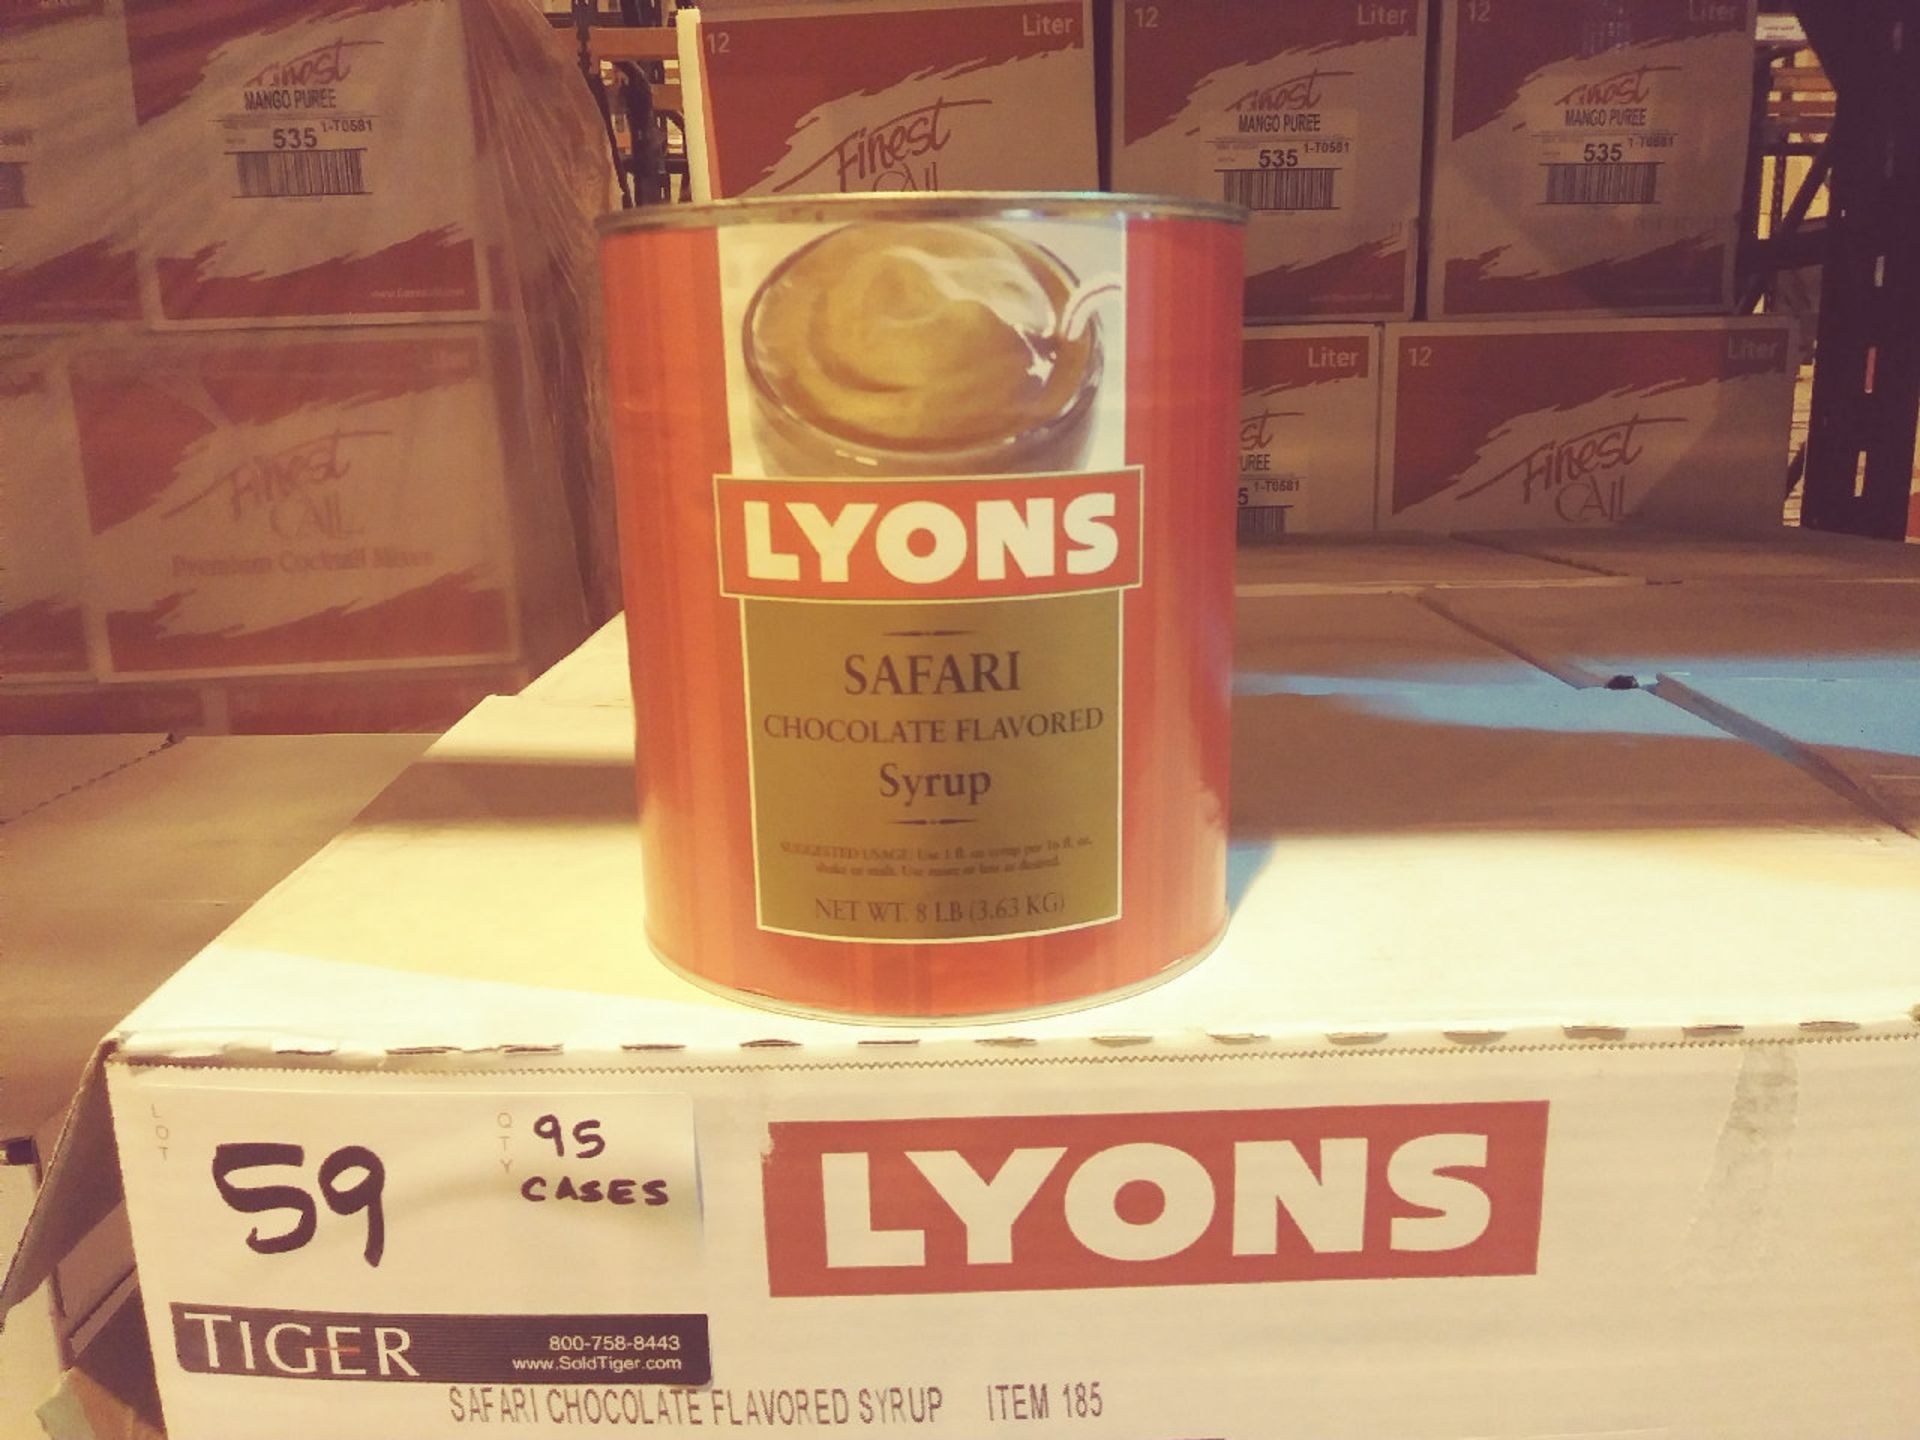 Lyons Chocolate Flavored Syrups